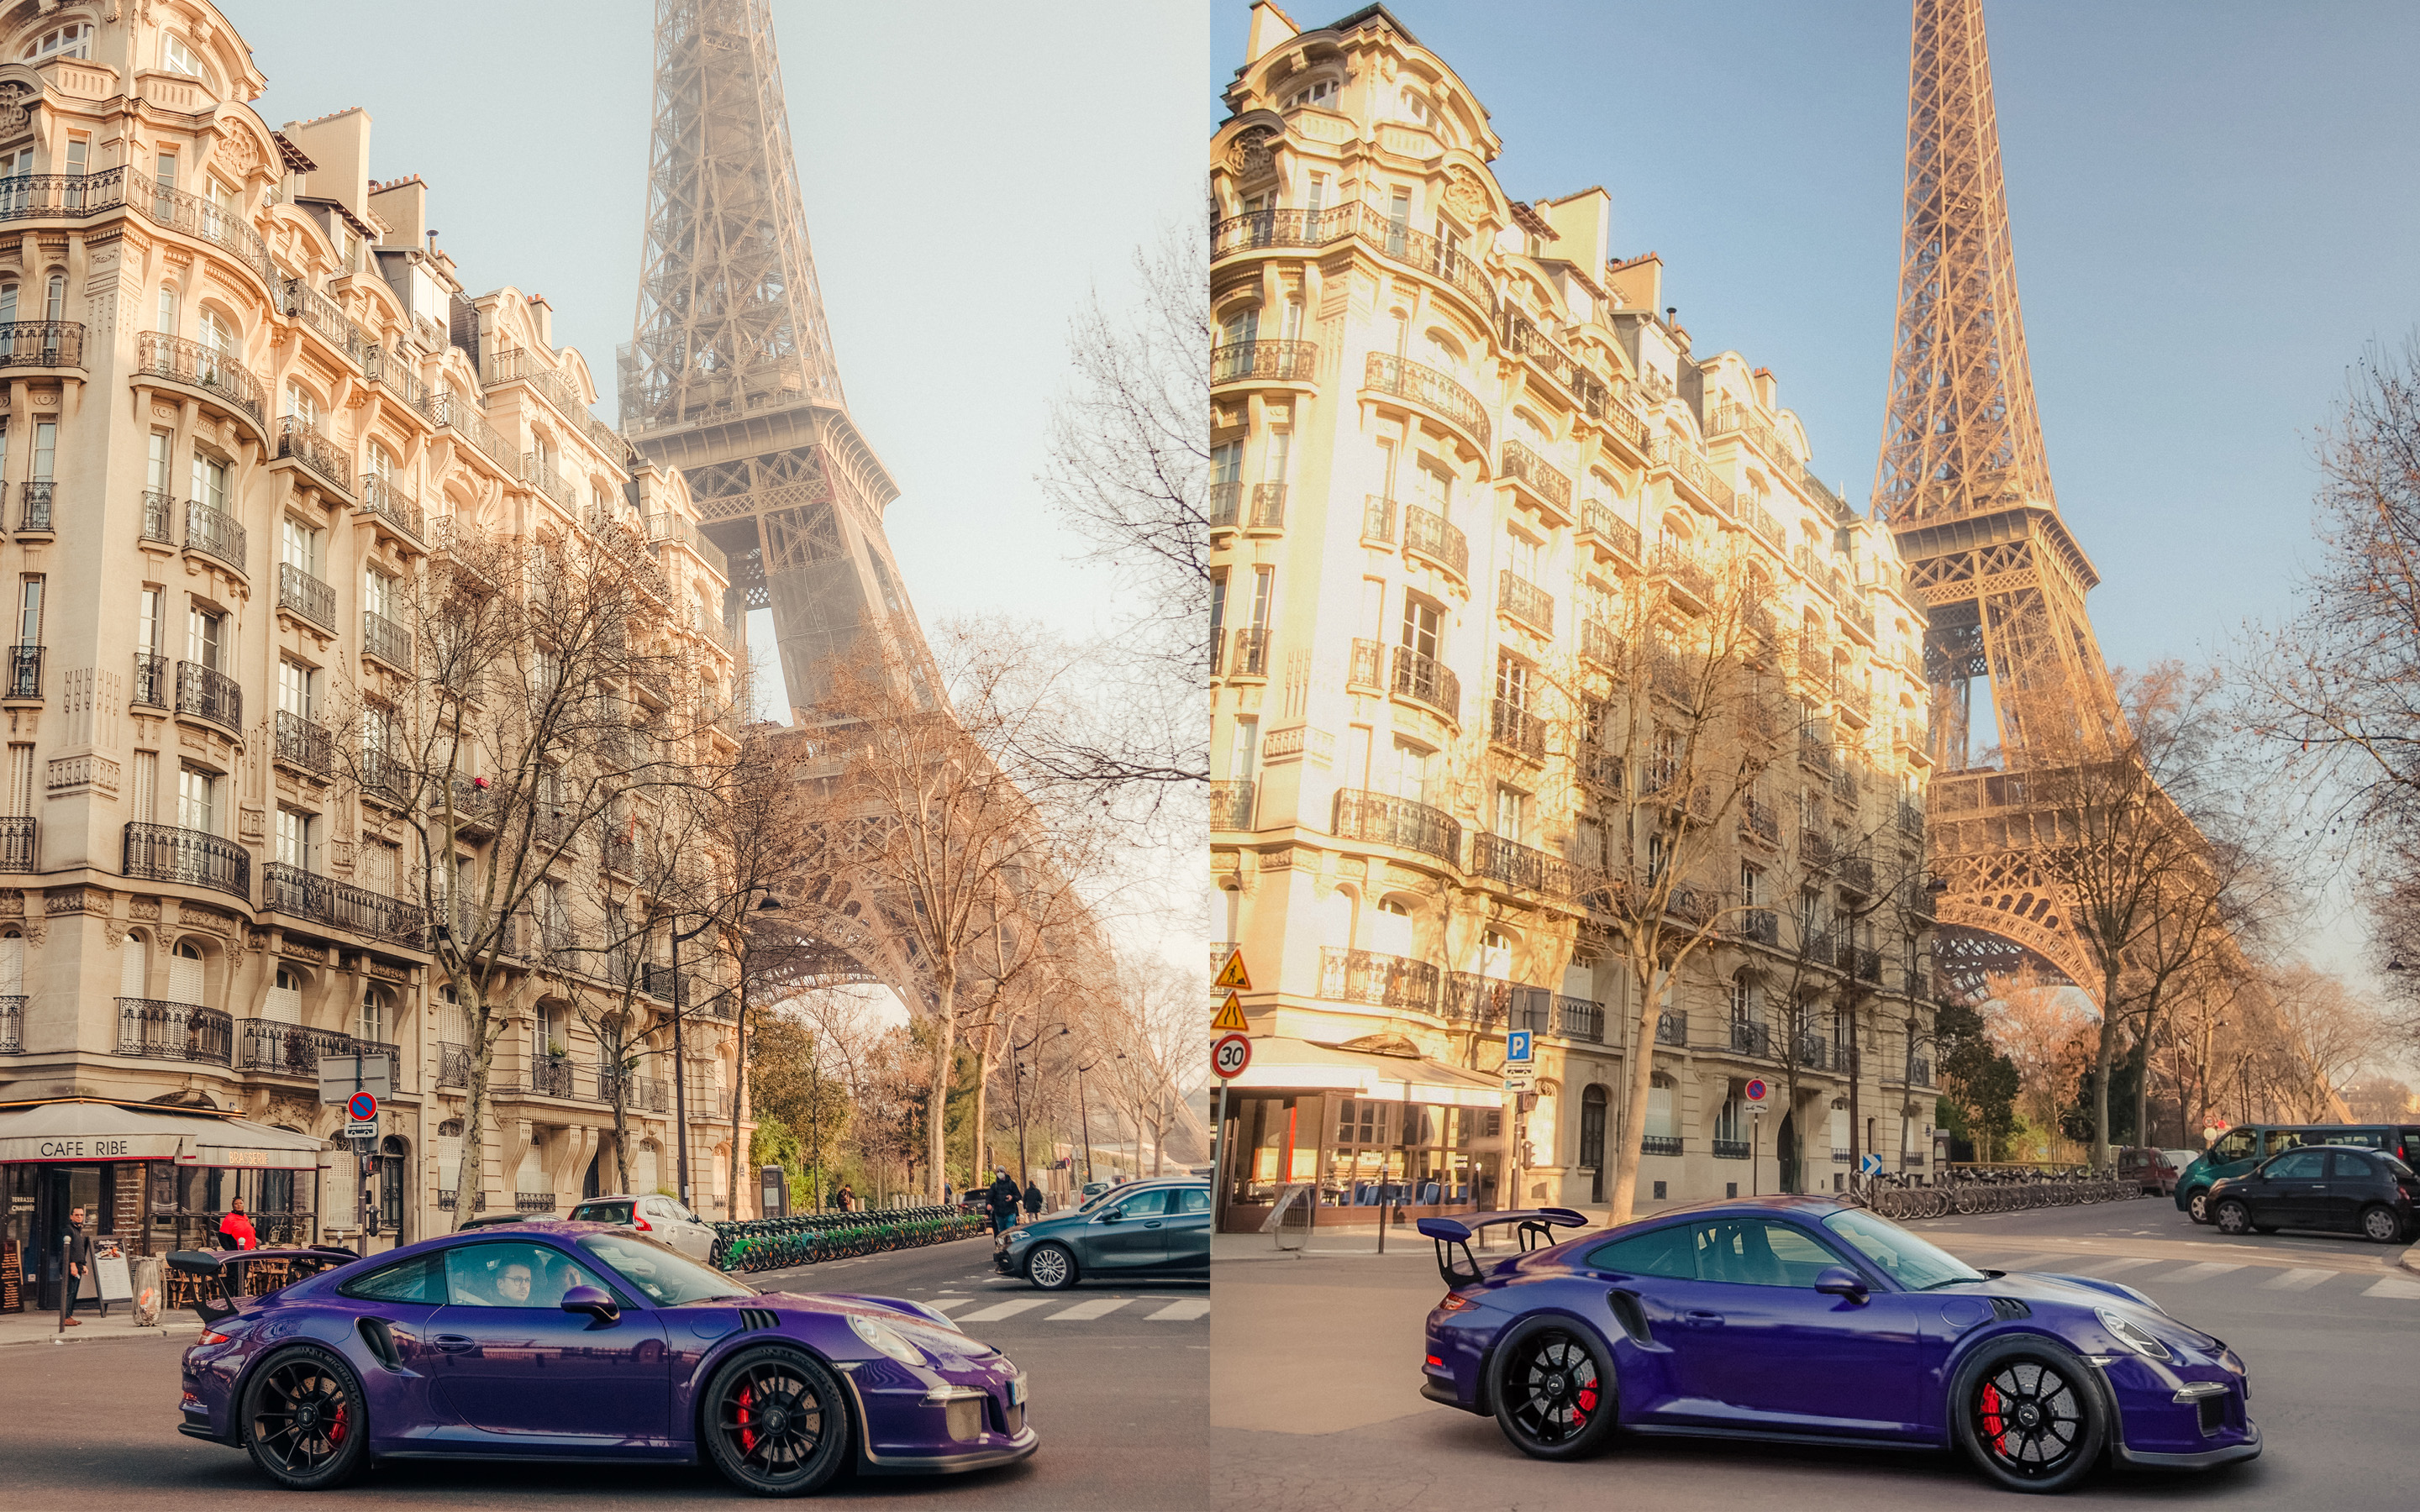 CGI GT3 RS and real car, Eiffel Tower behind